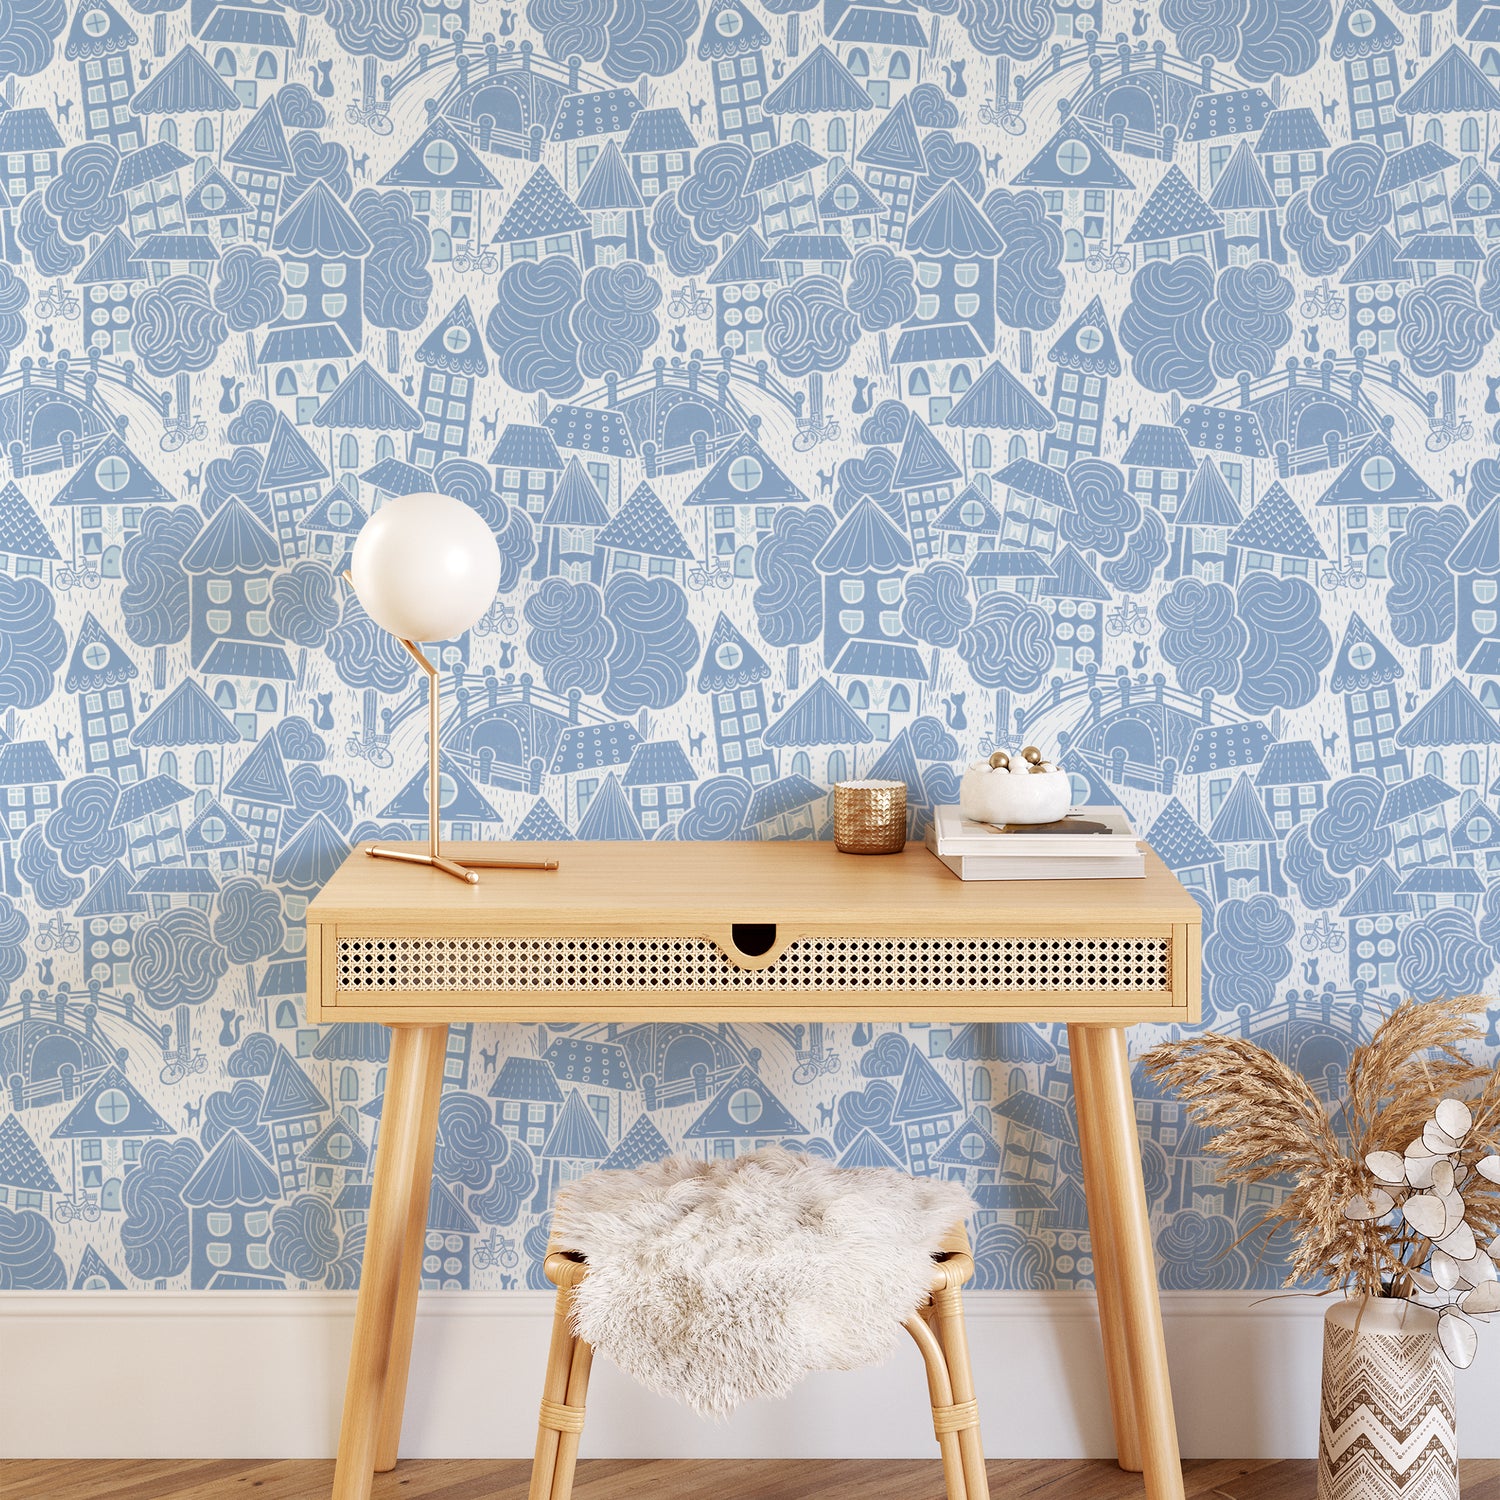 Houses Wallpaper in Blue shown in a homework nook.